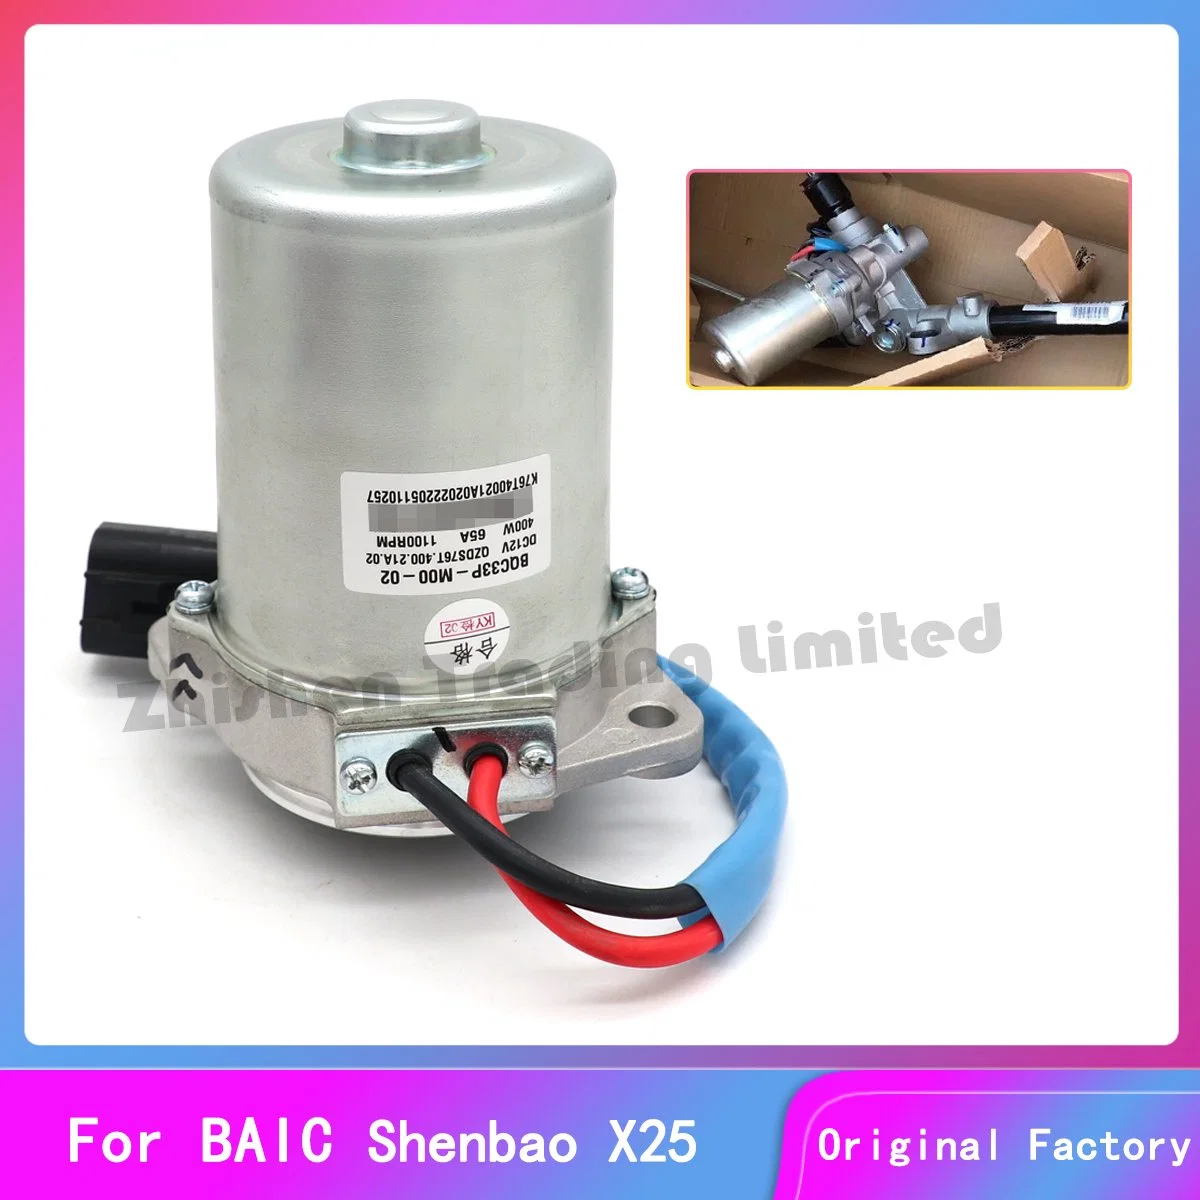 Baic Auto Spare Part Auto Accessory Car Spare Part Vehicle Part Automobile for Shenbao X25 Electronic Steering Machine Steering Motor Motor Original Factory